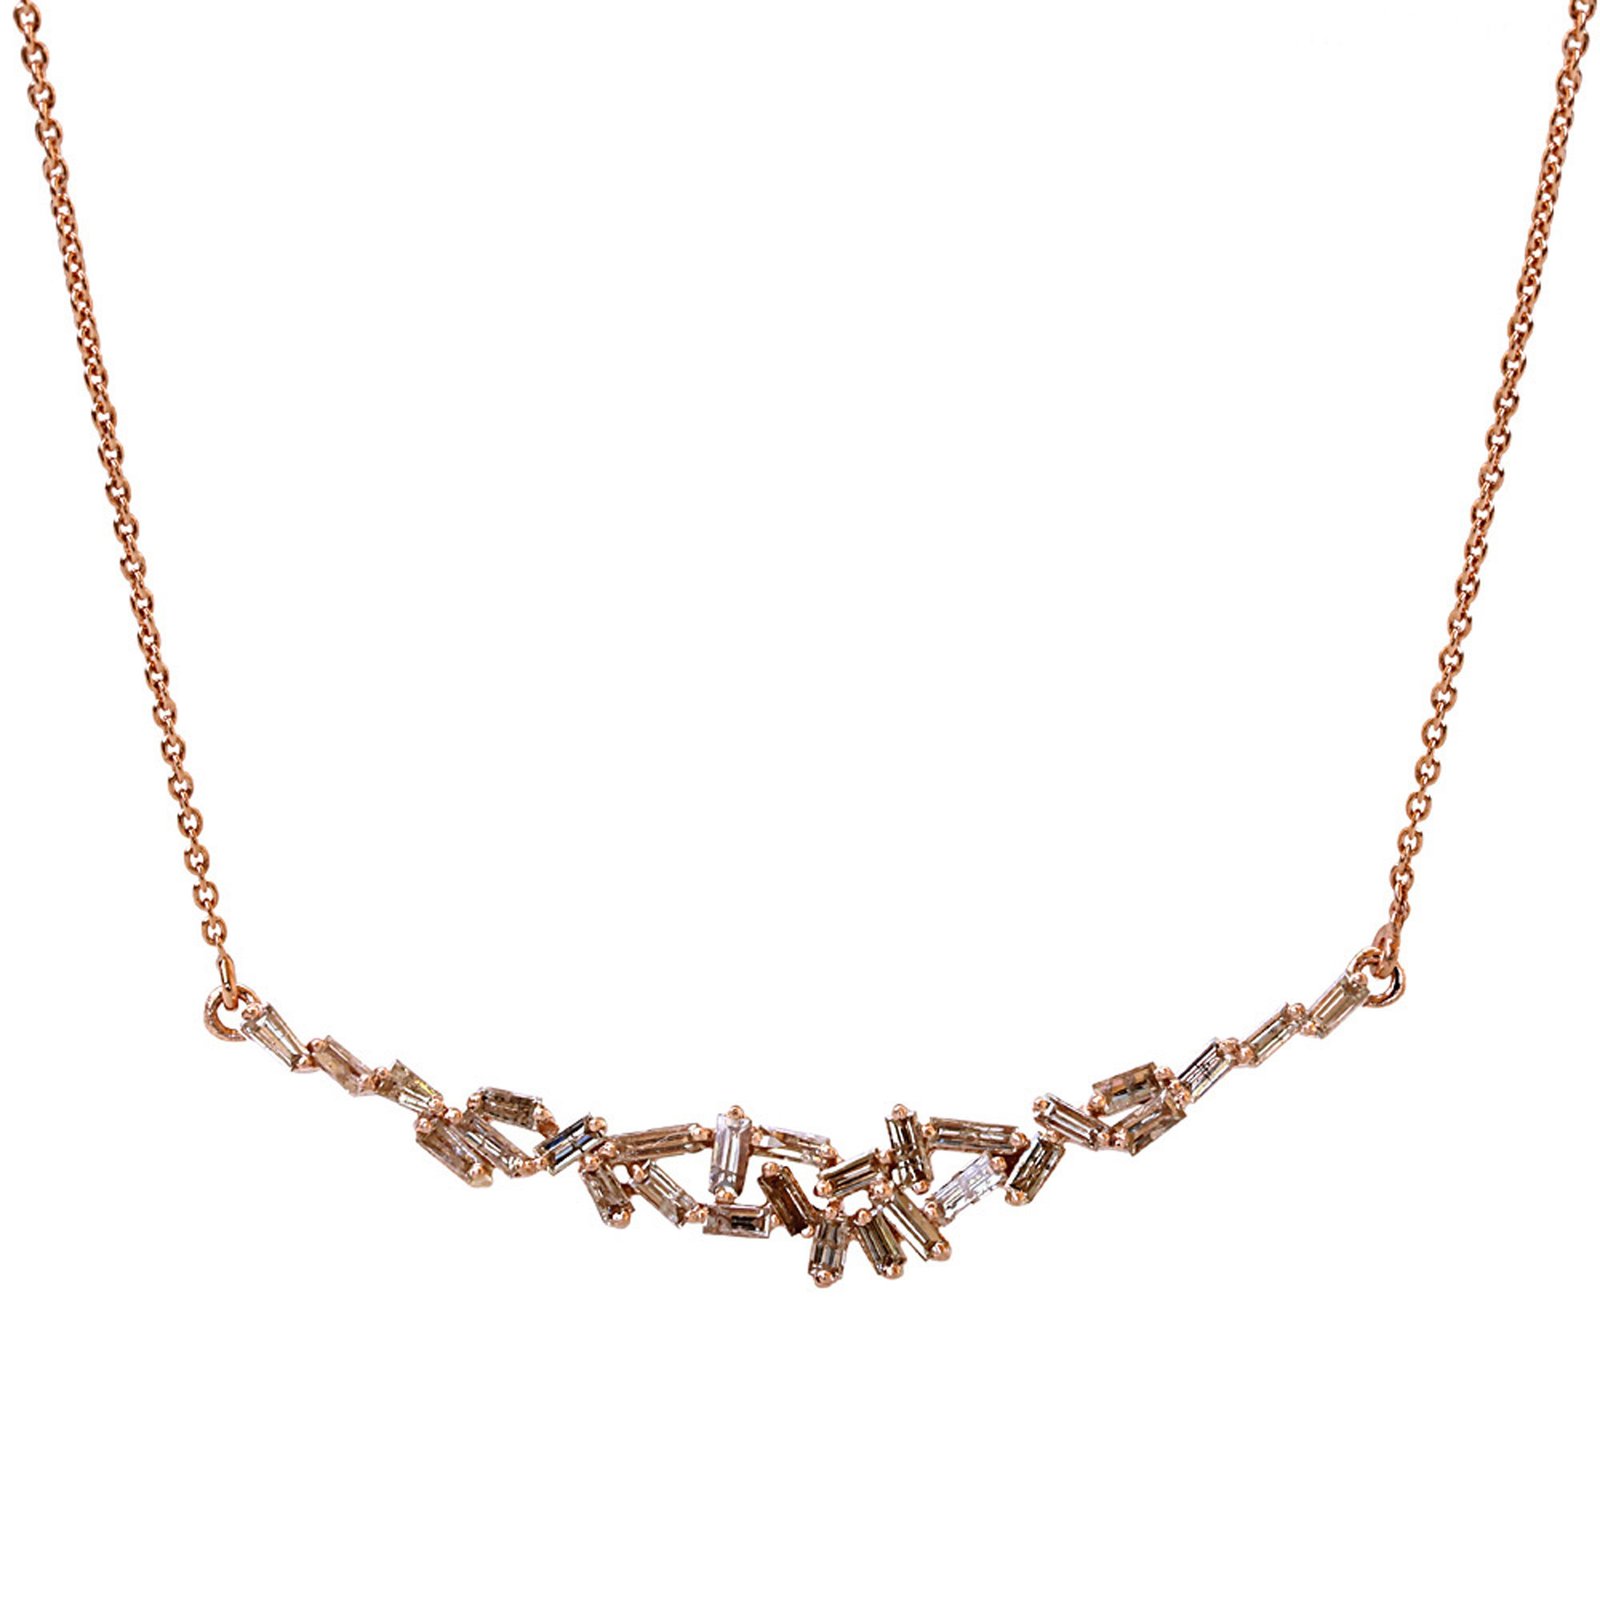 Real diamond baguette necklace, 18k solid gold chain jewelry